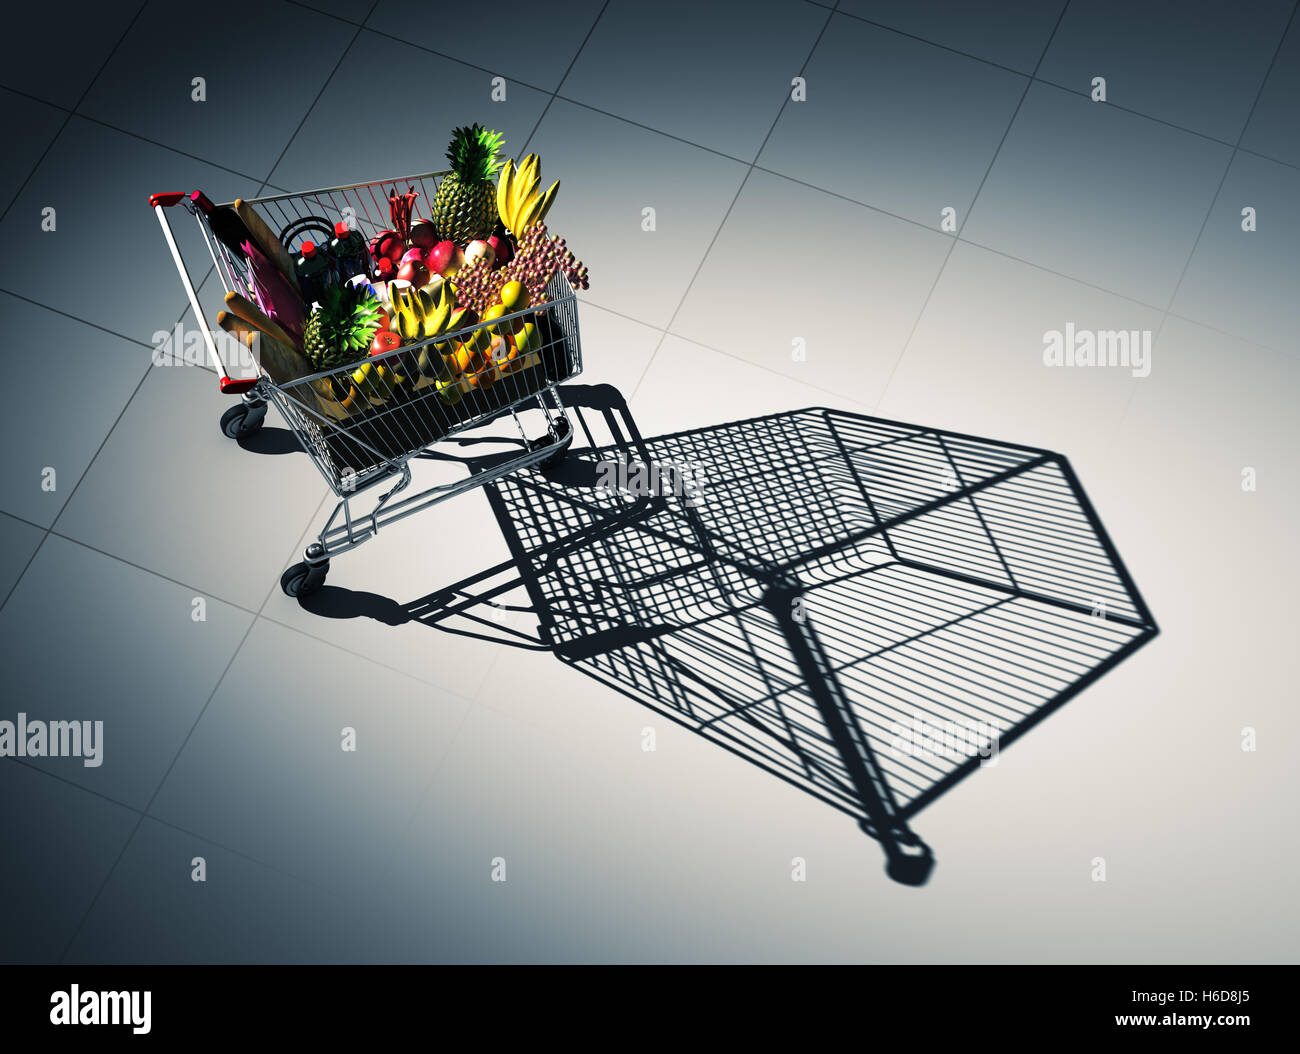 Full Shopping Cart Cast Shadow On The Floor As Empty Shopping Cart. 3D Illustration. Stock Photo